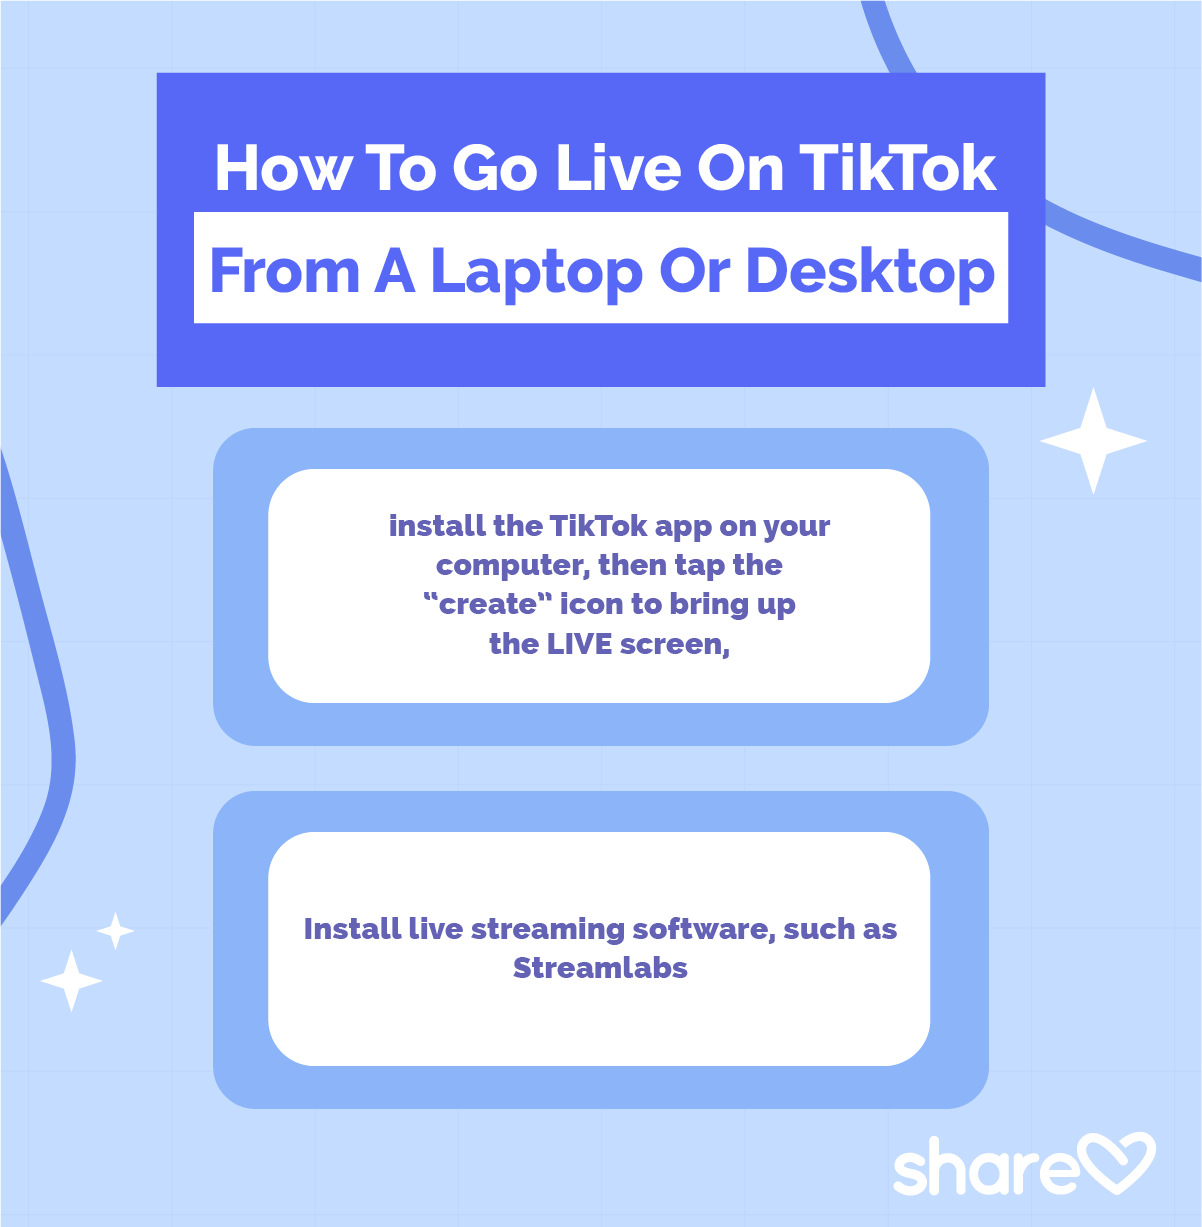 How To Go Live On TikTok From A Laptop Or Desktop